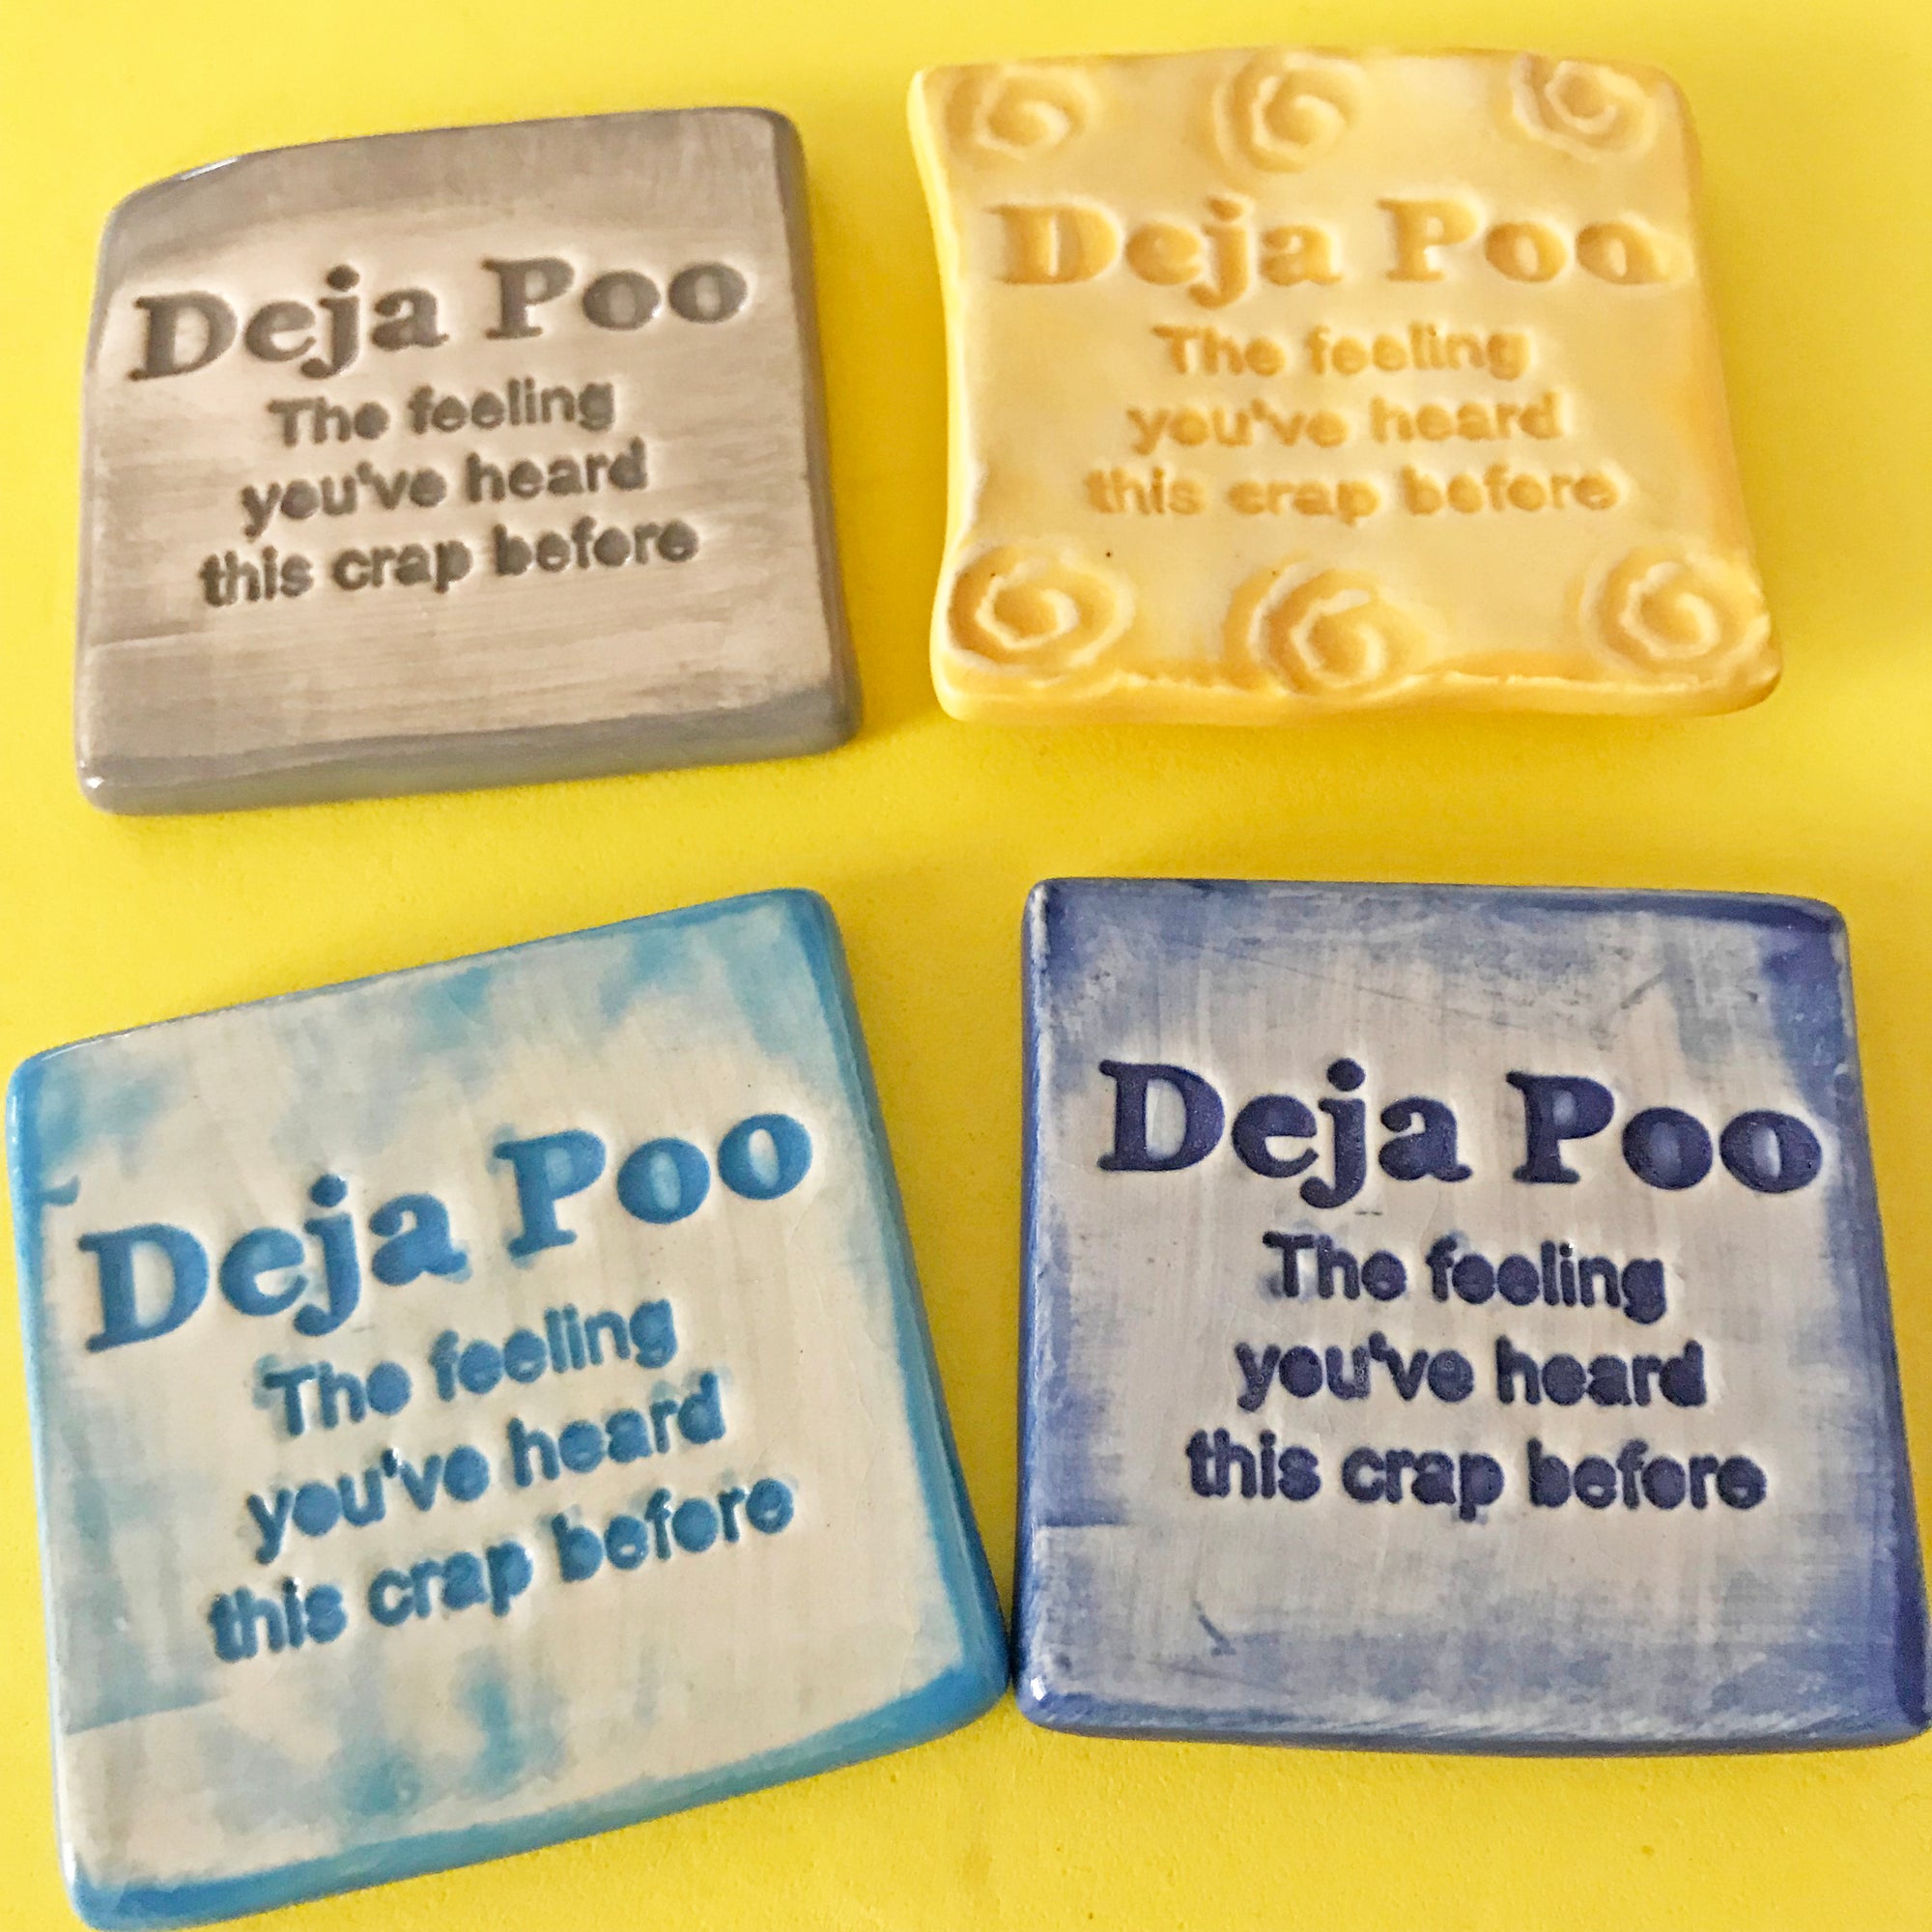 A handmade magnet with the phrase:  "Deja Poo:  the feeling you've heard this crap before".